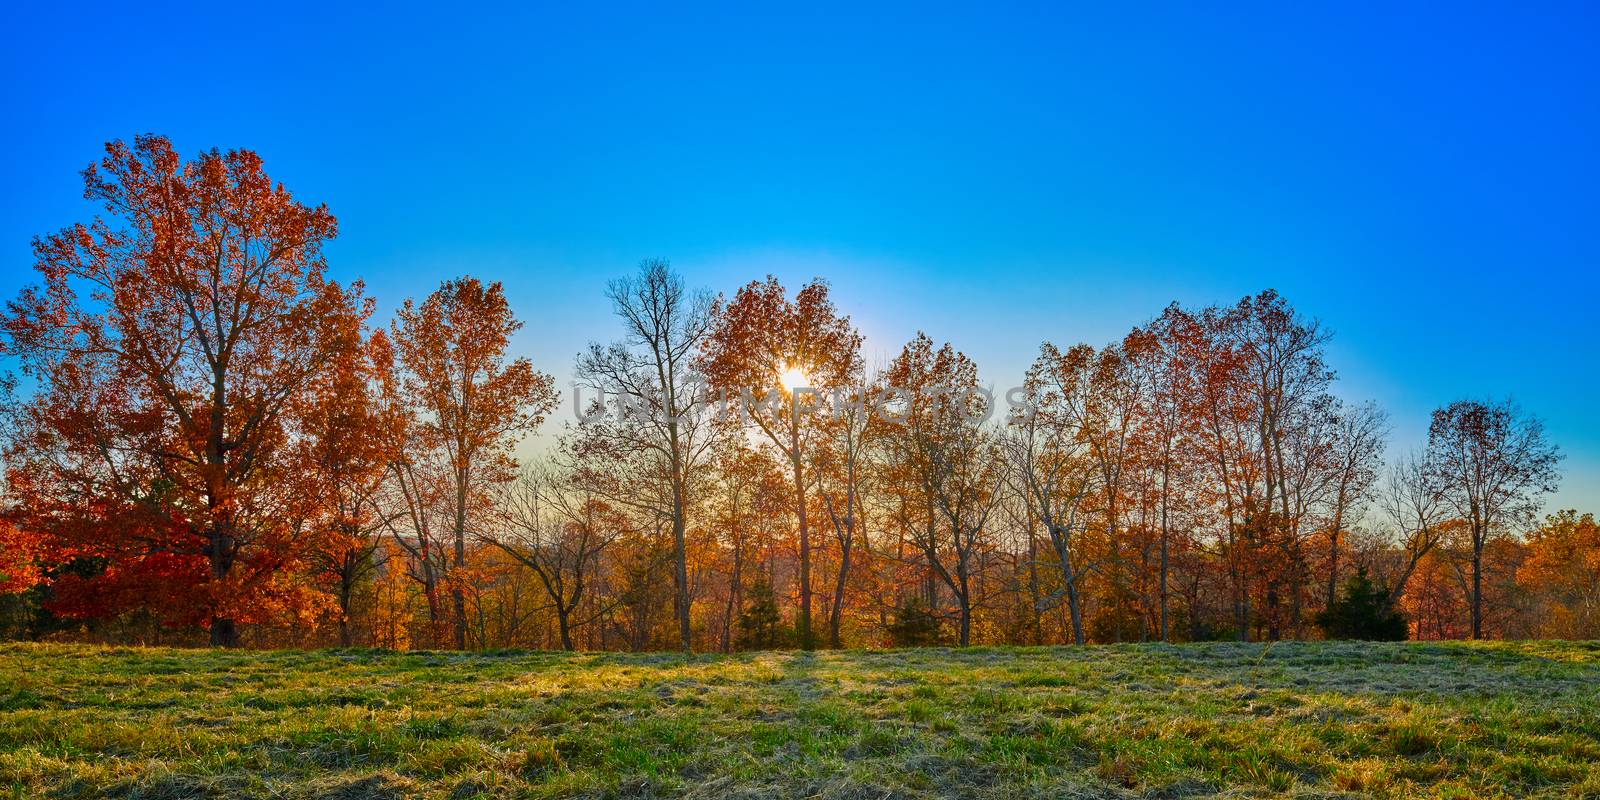 Setting sun behind Fall colored trees with blue sky. by patrickstock